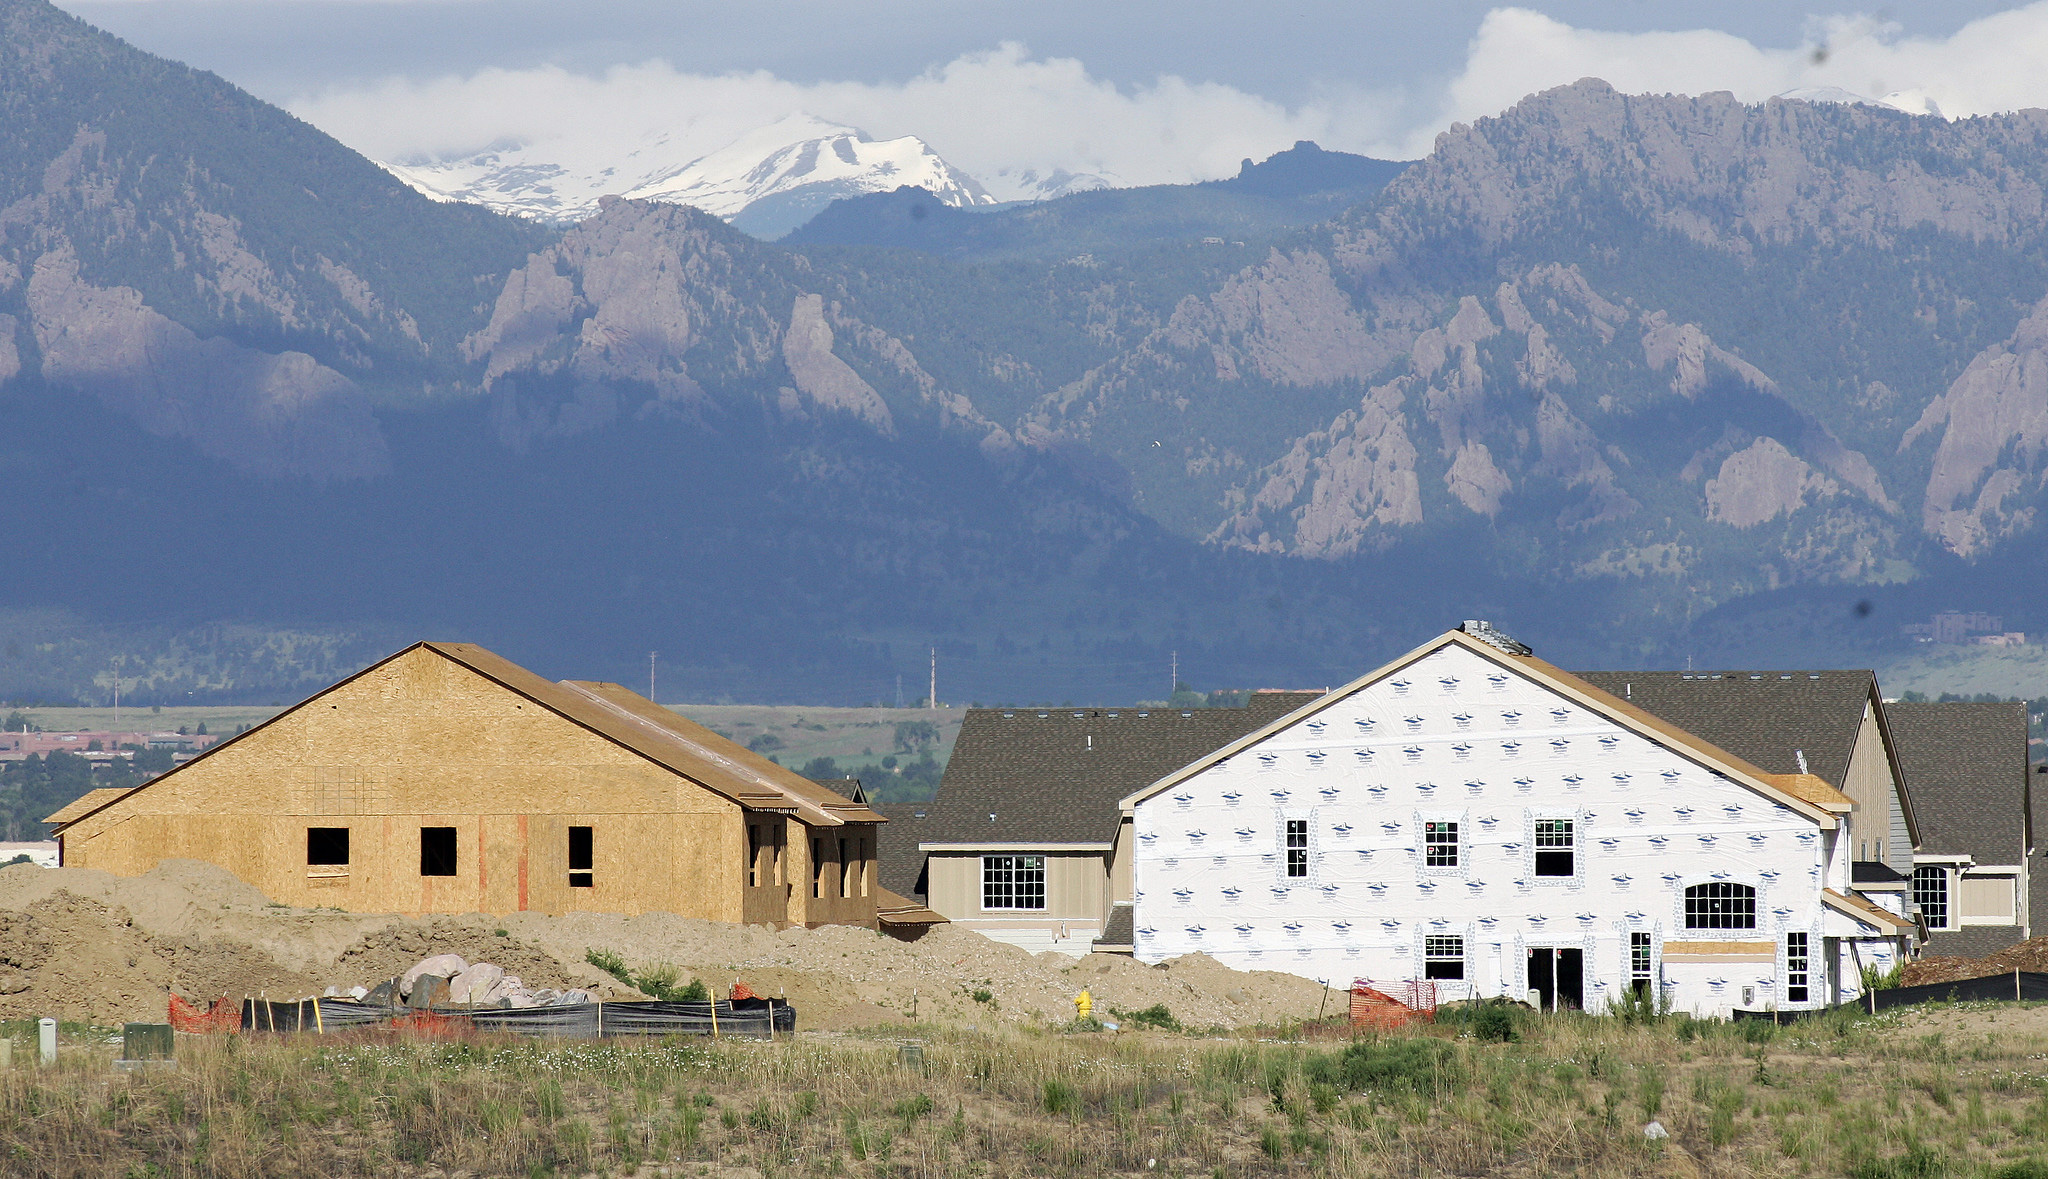 Mountains in the background of a housing development that is under construction.